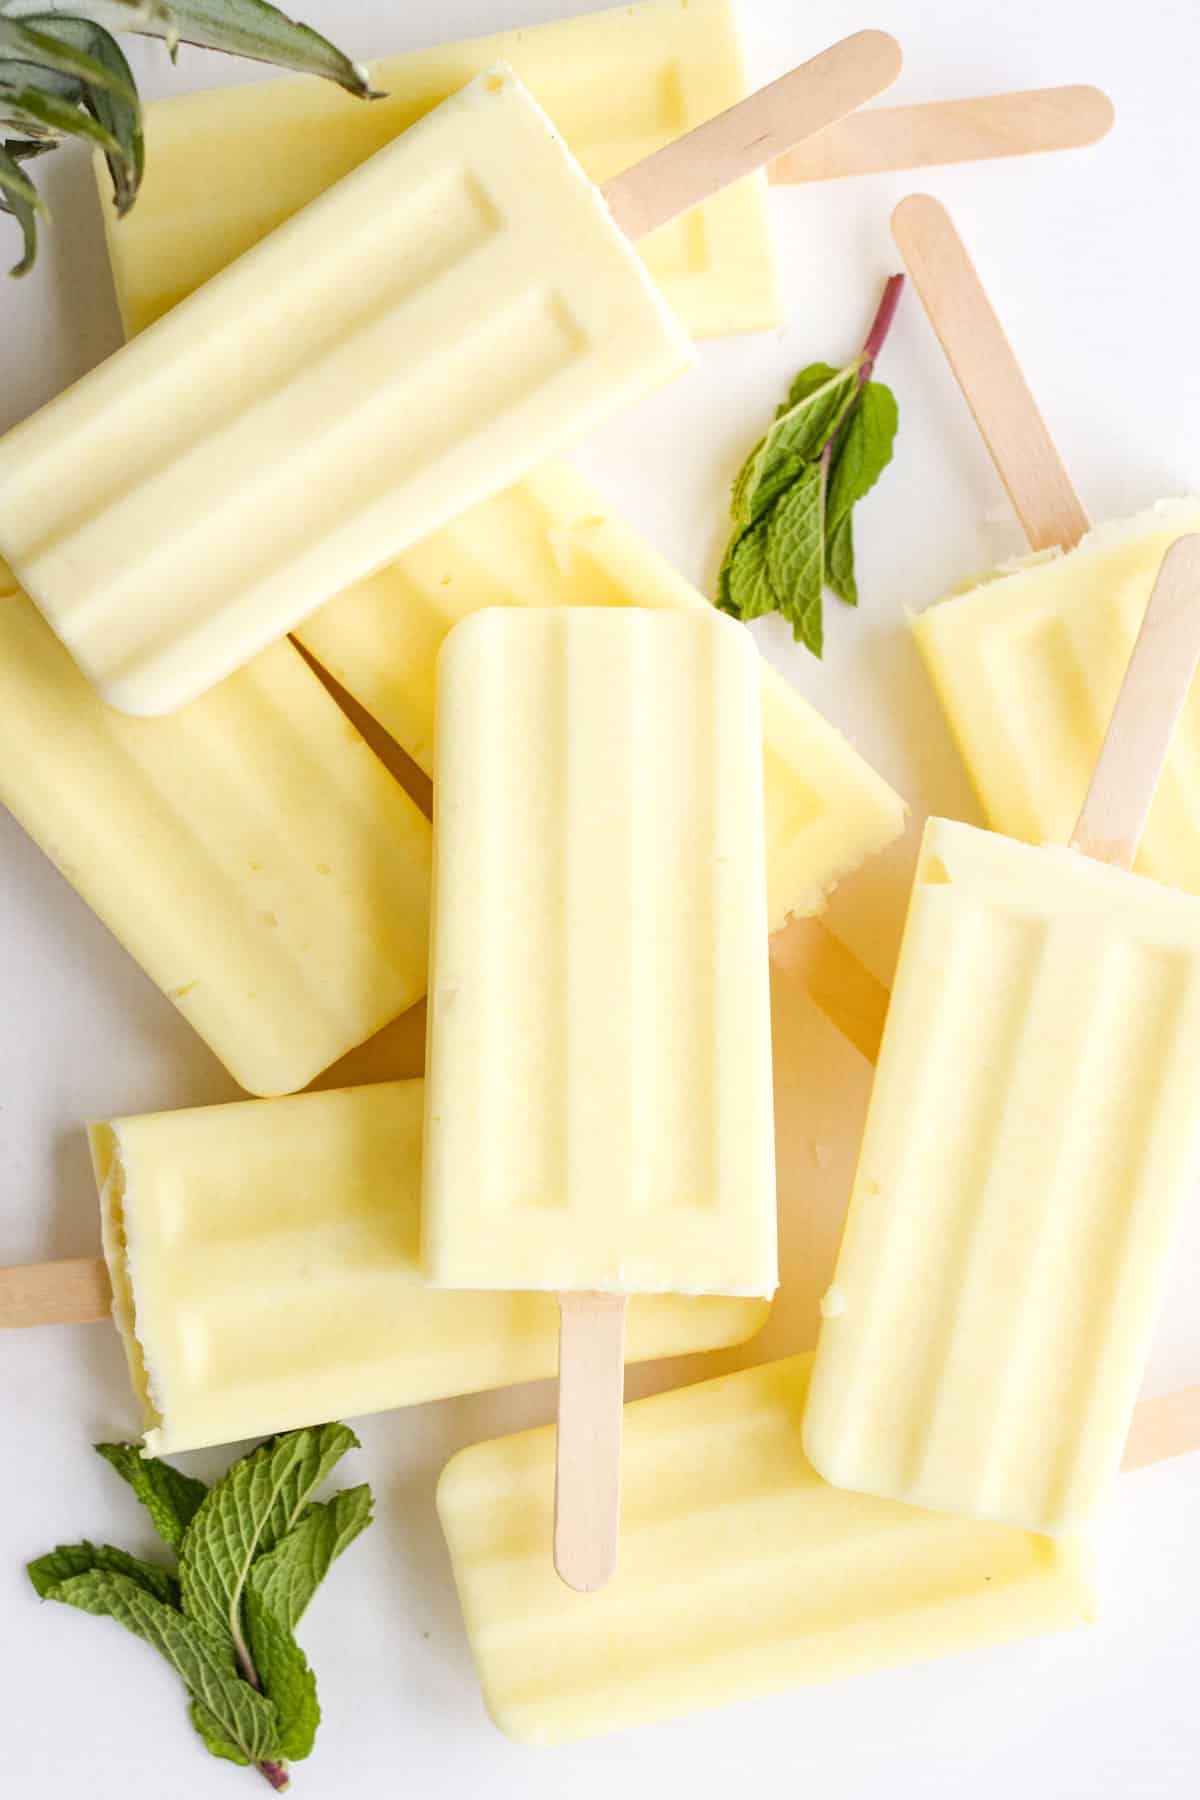 Dole whip popsicles laying in different directions on a white counter with some stacked and garnished with fresh mint.